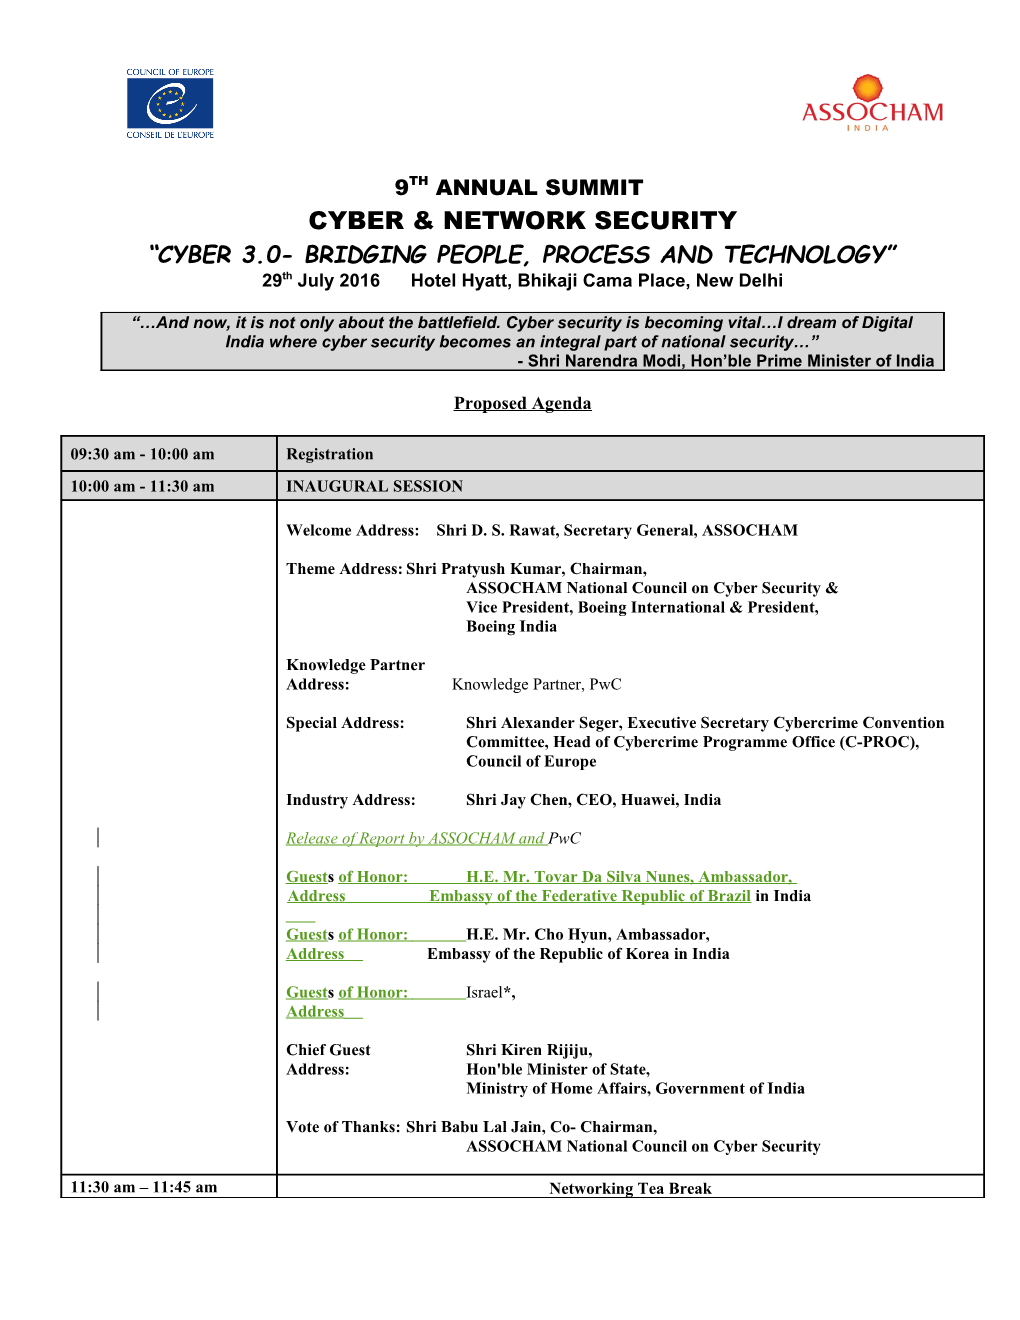 Cyber 3.0- Bridging People, Process and TECHNOLOGY